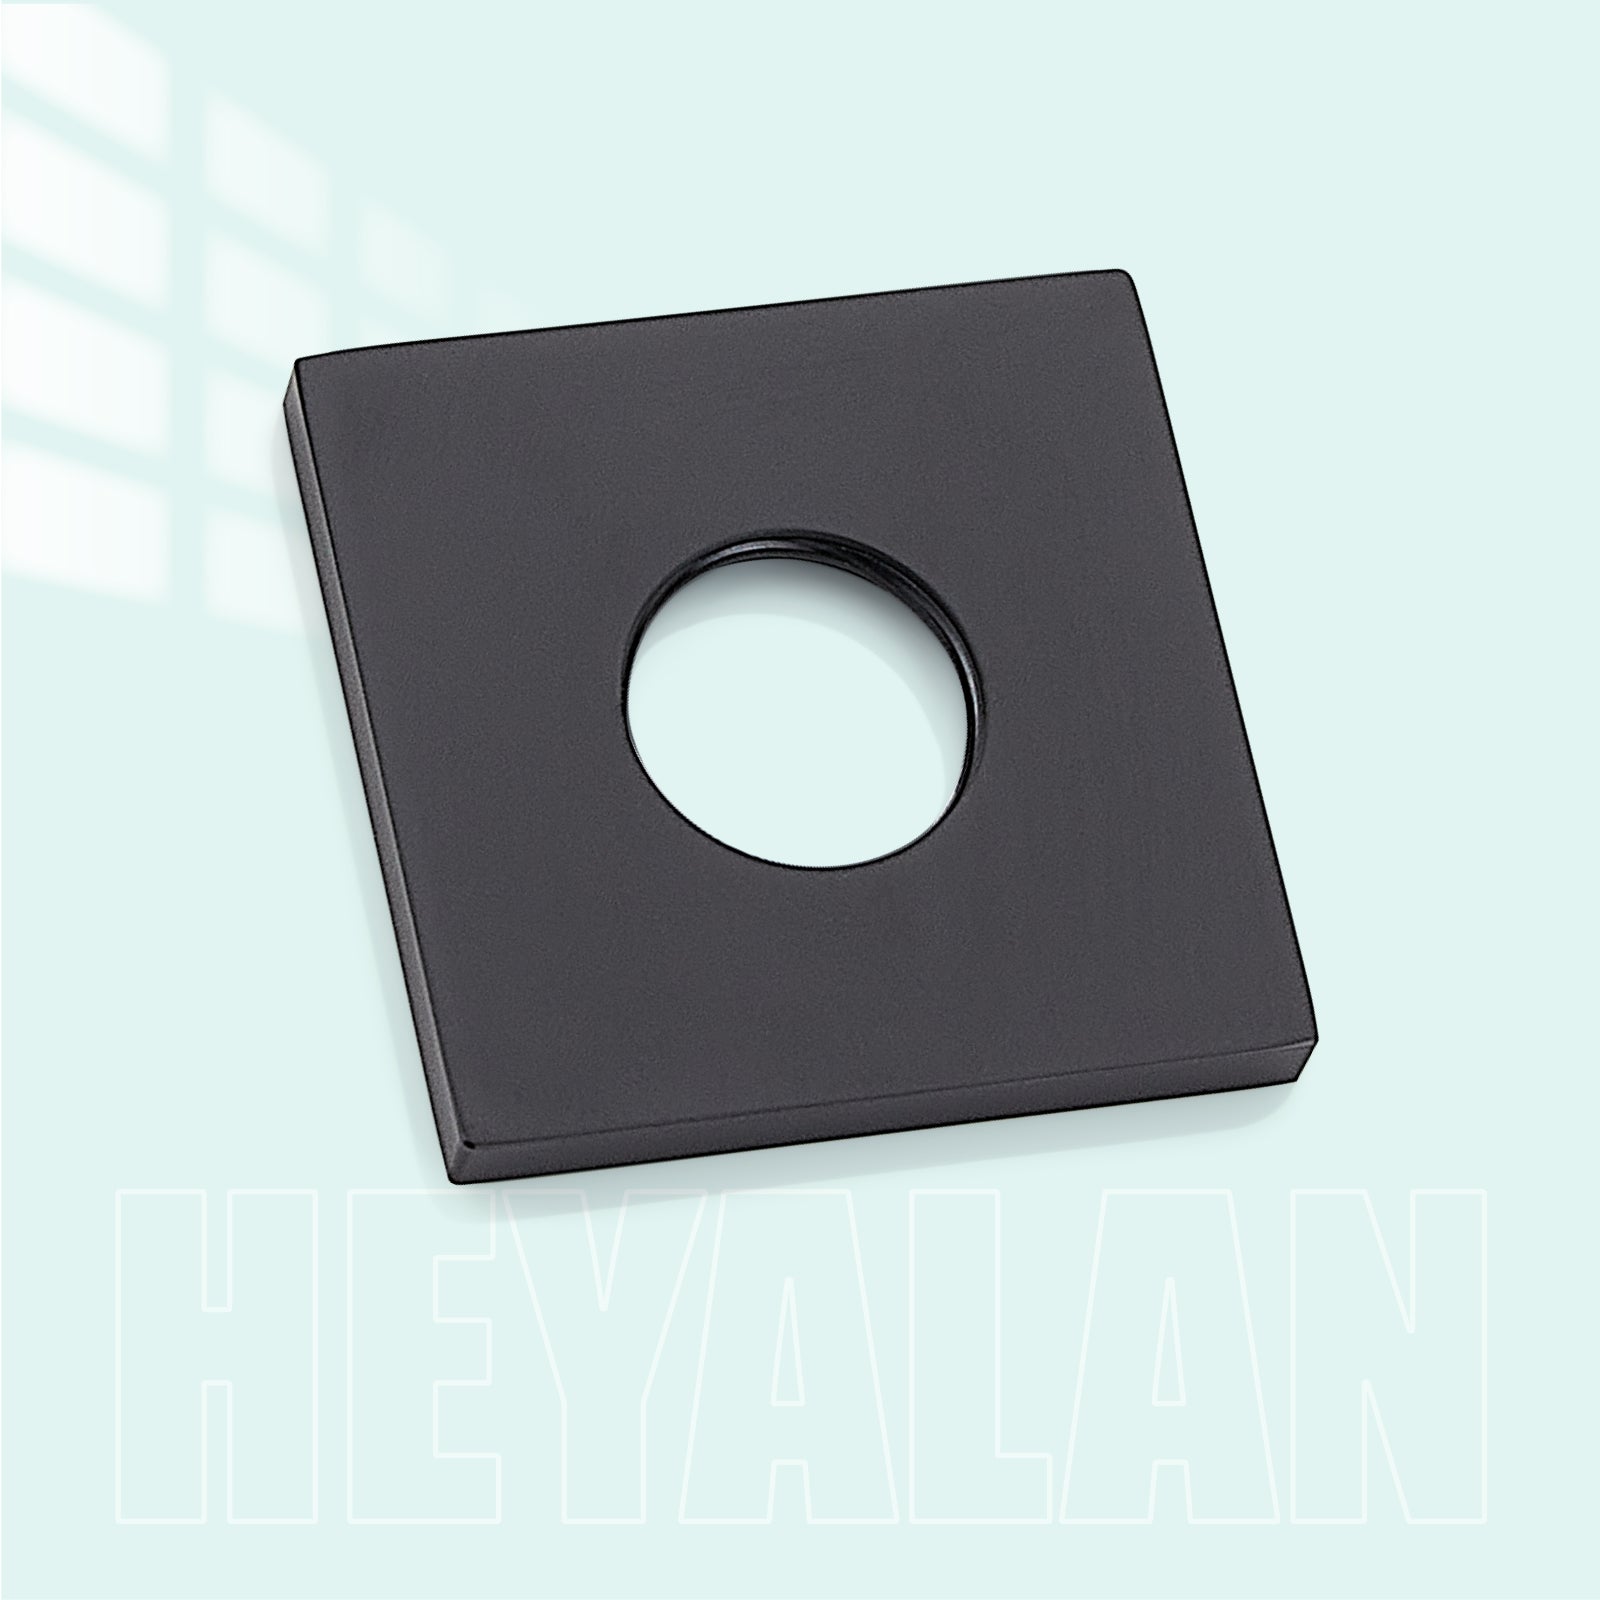 Heyalan Shower Arm Flange Plate, 1pc Modern Shower Escutcheon Cover Plate 2.5'', Universal Shower Head Arm Replacement Cover Plate, Square Escutcheon Wall Cover